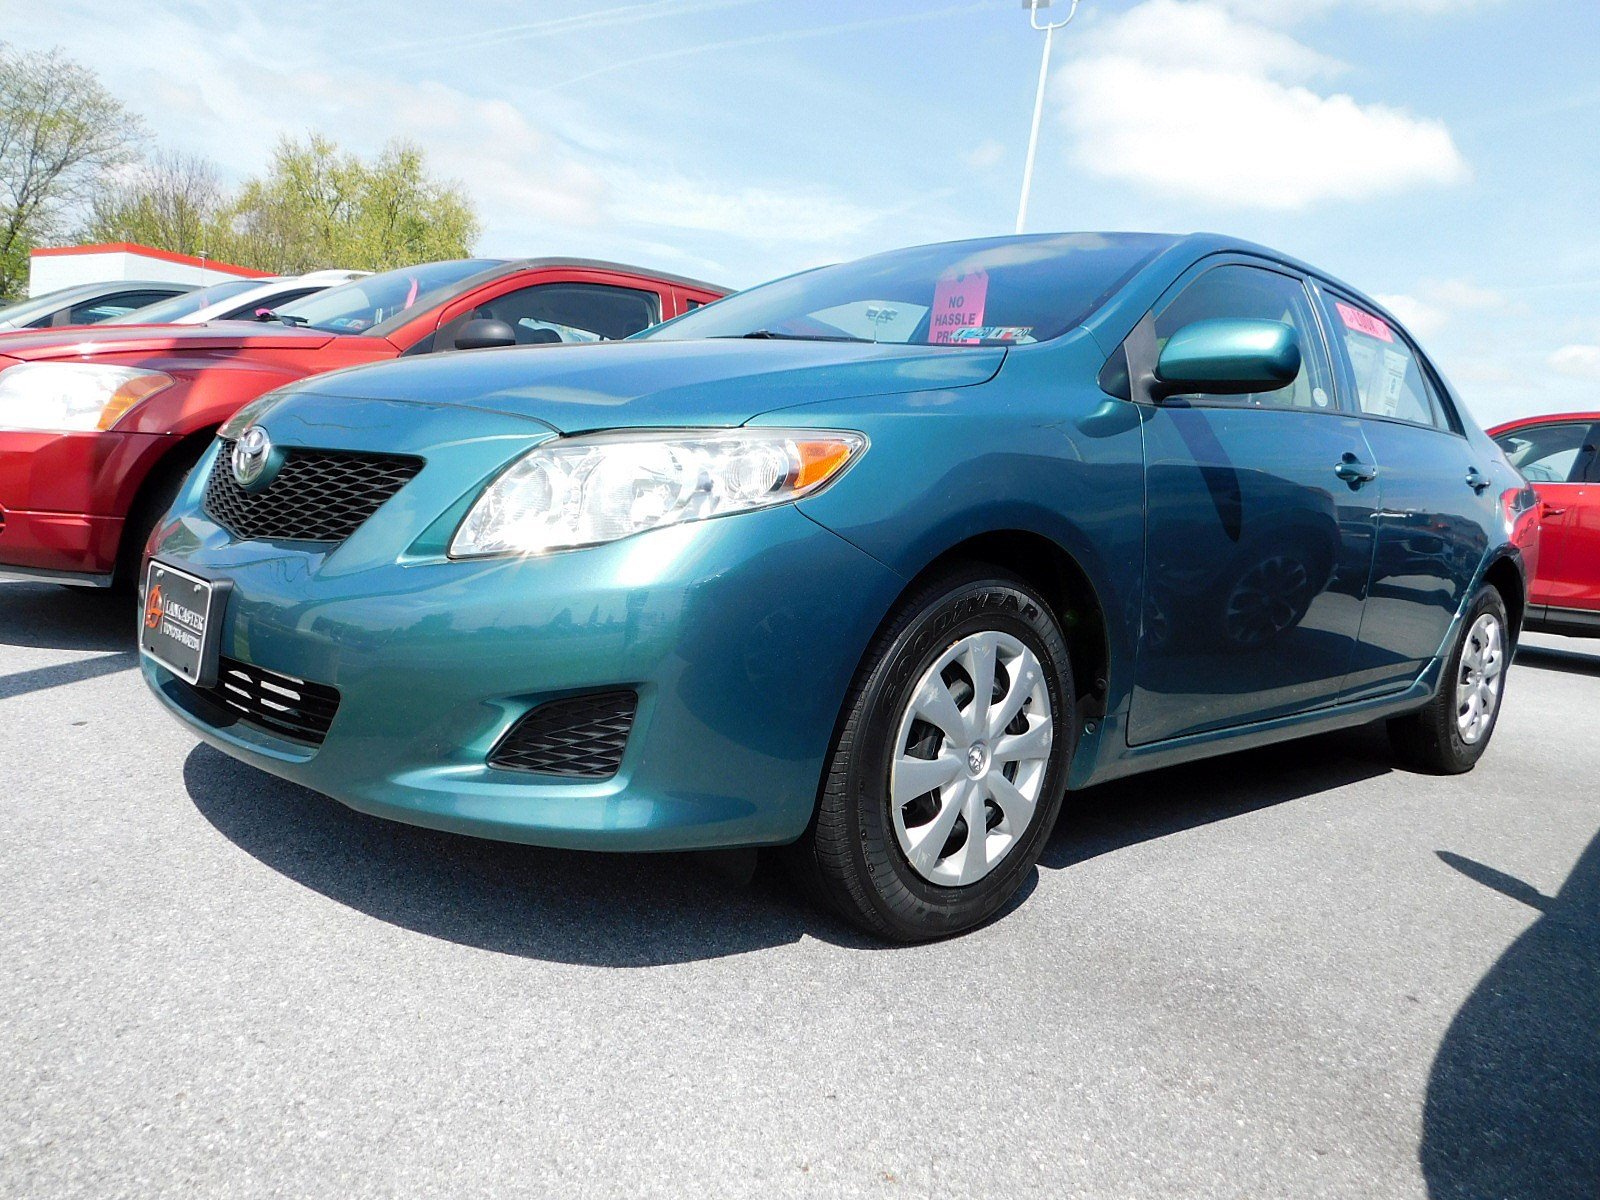 Pre-Owned 2010 Toyota Corolla LE 4dr Car in East Petersburg #K0153 ...